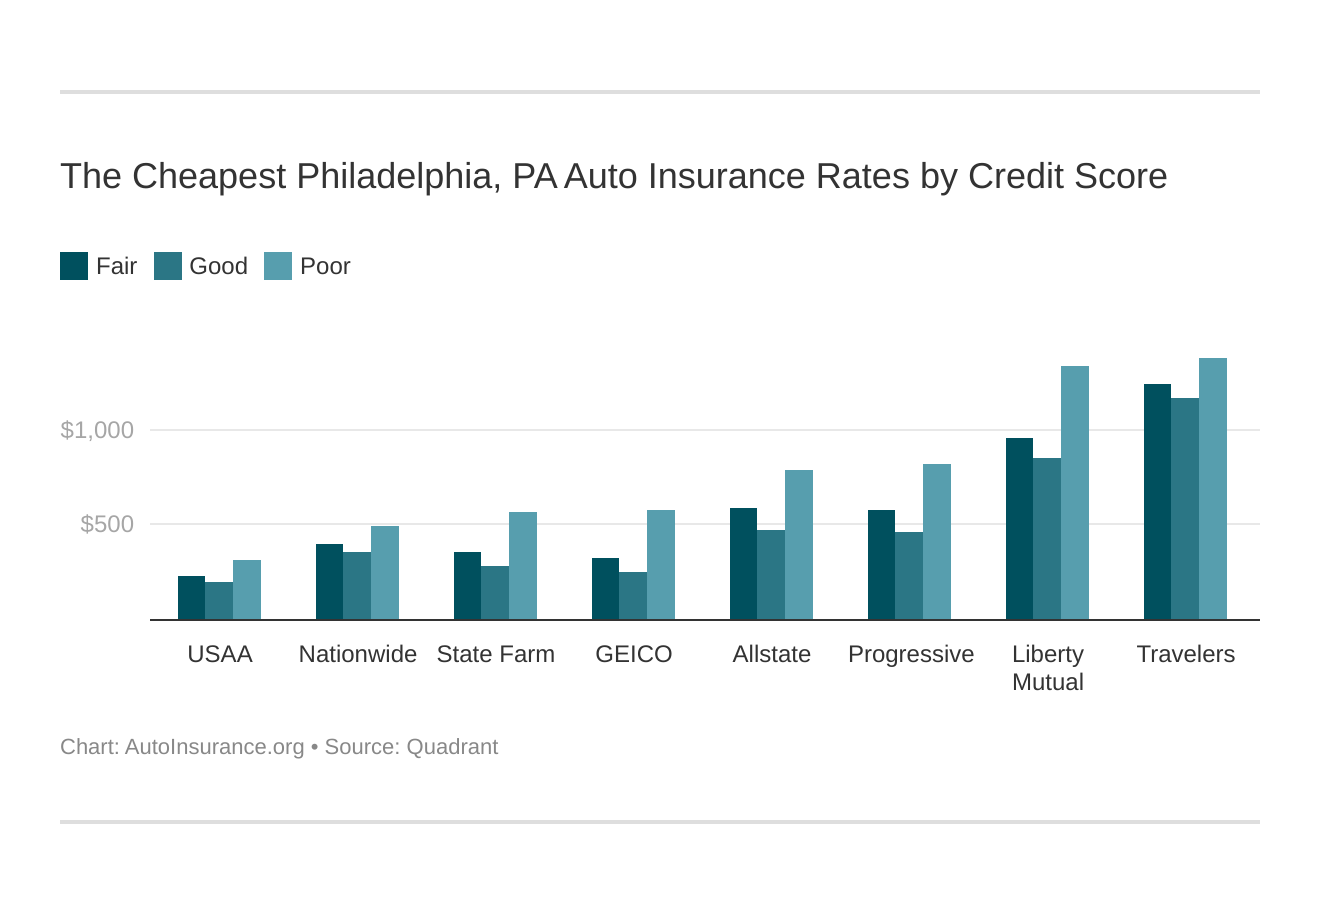 The Cheapest Philadelphia, PA Auto Insurance Rates by Credit Score